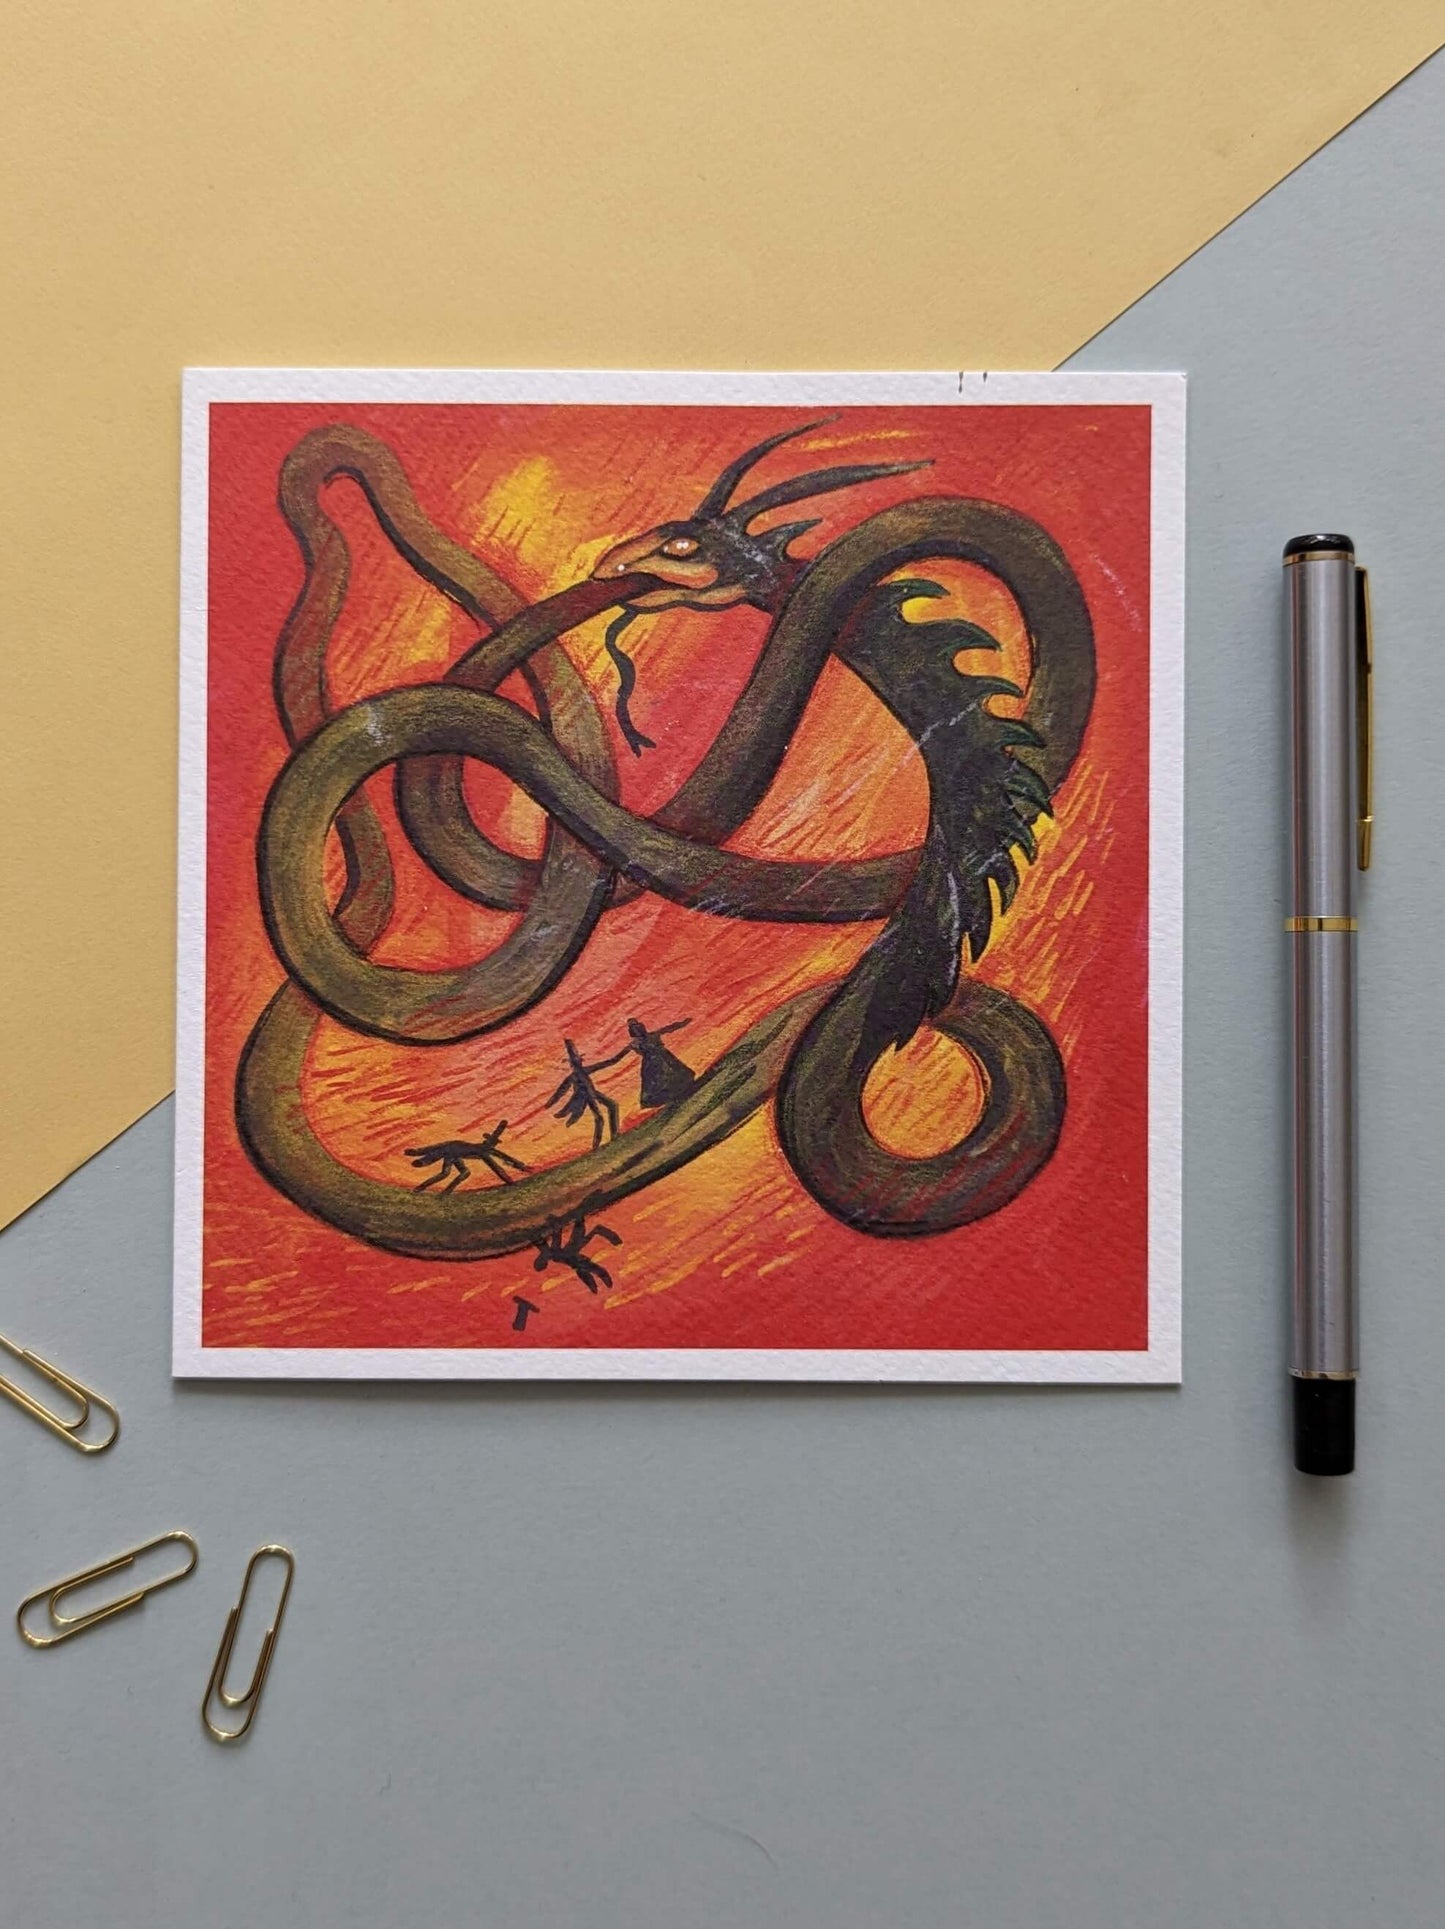 The Ourobouros Dragon Serpent – (end of line) greeting card